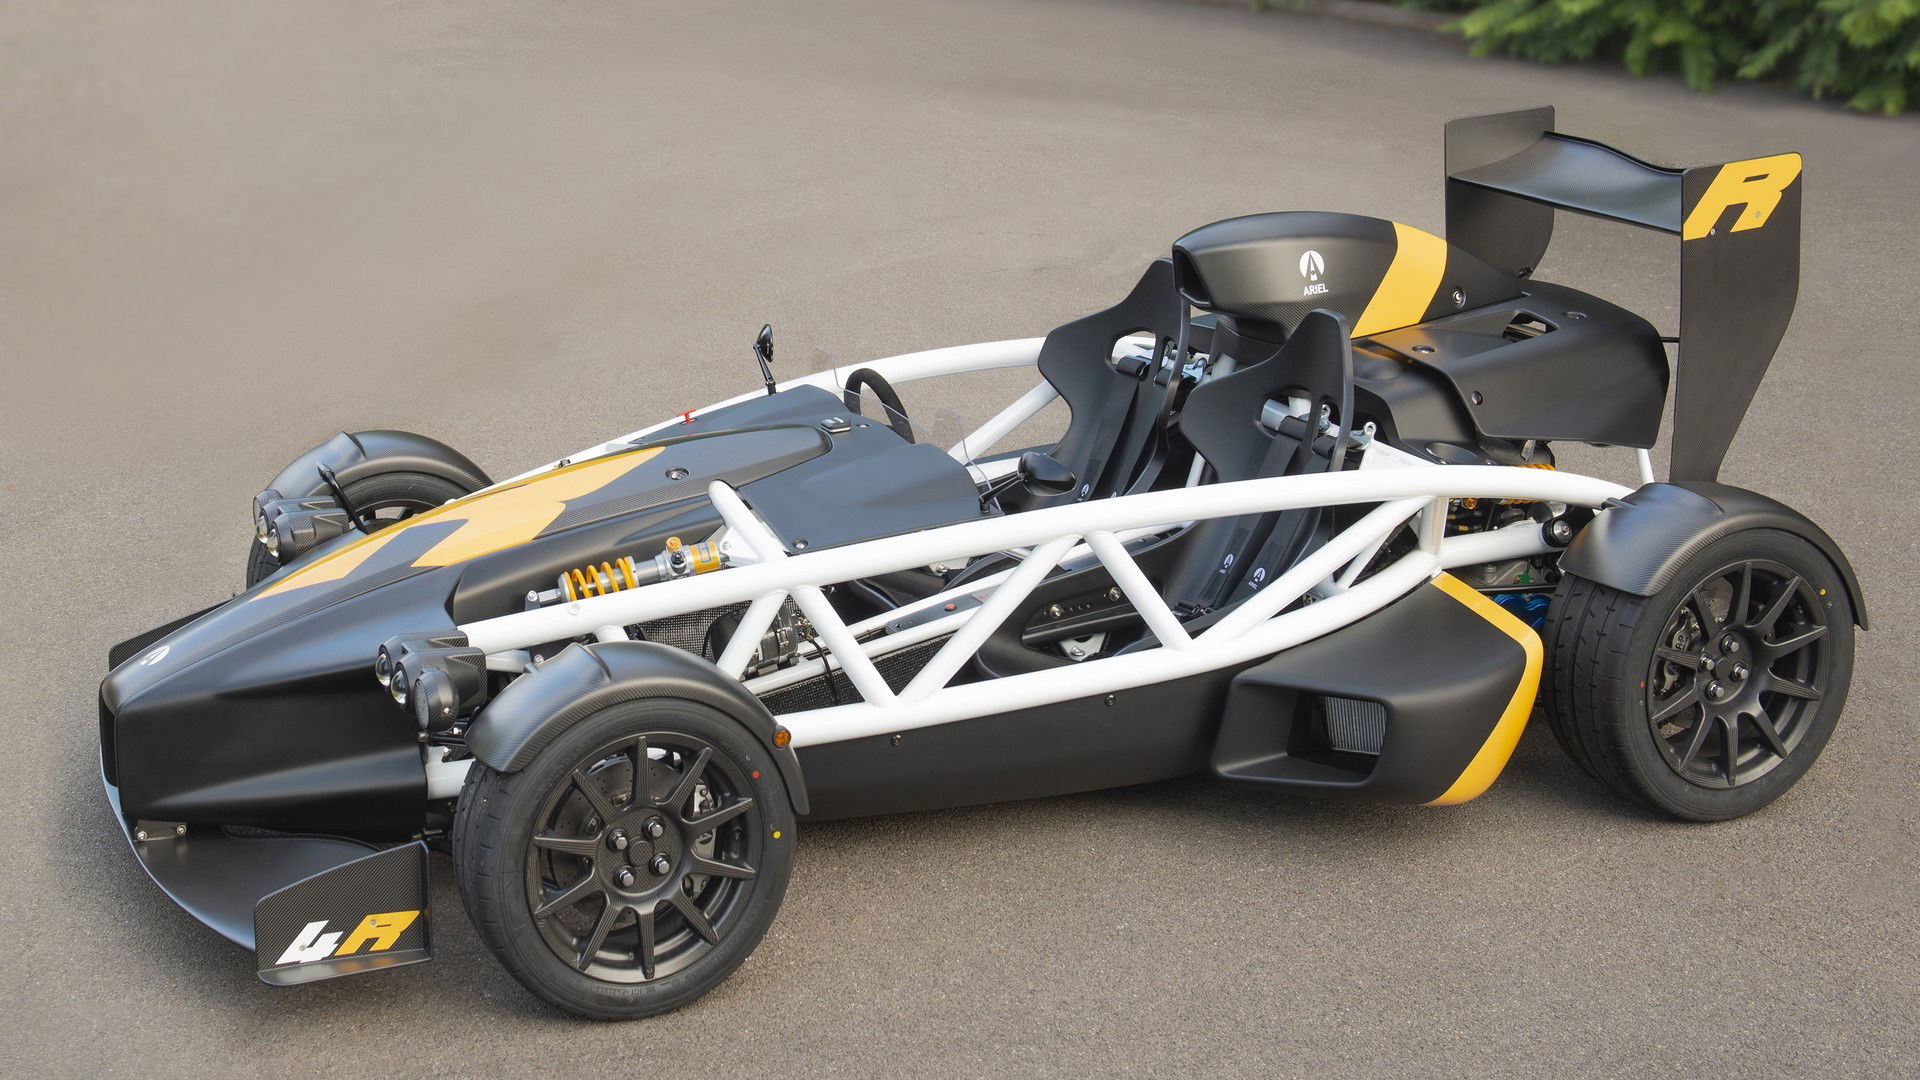 Ariel Atom 4R price and availability.